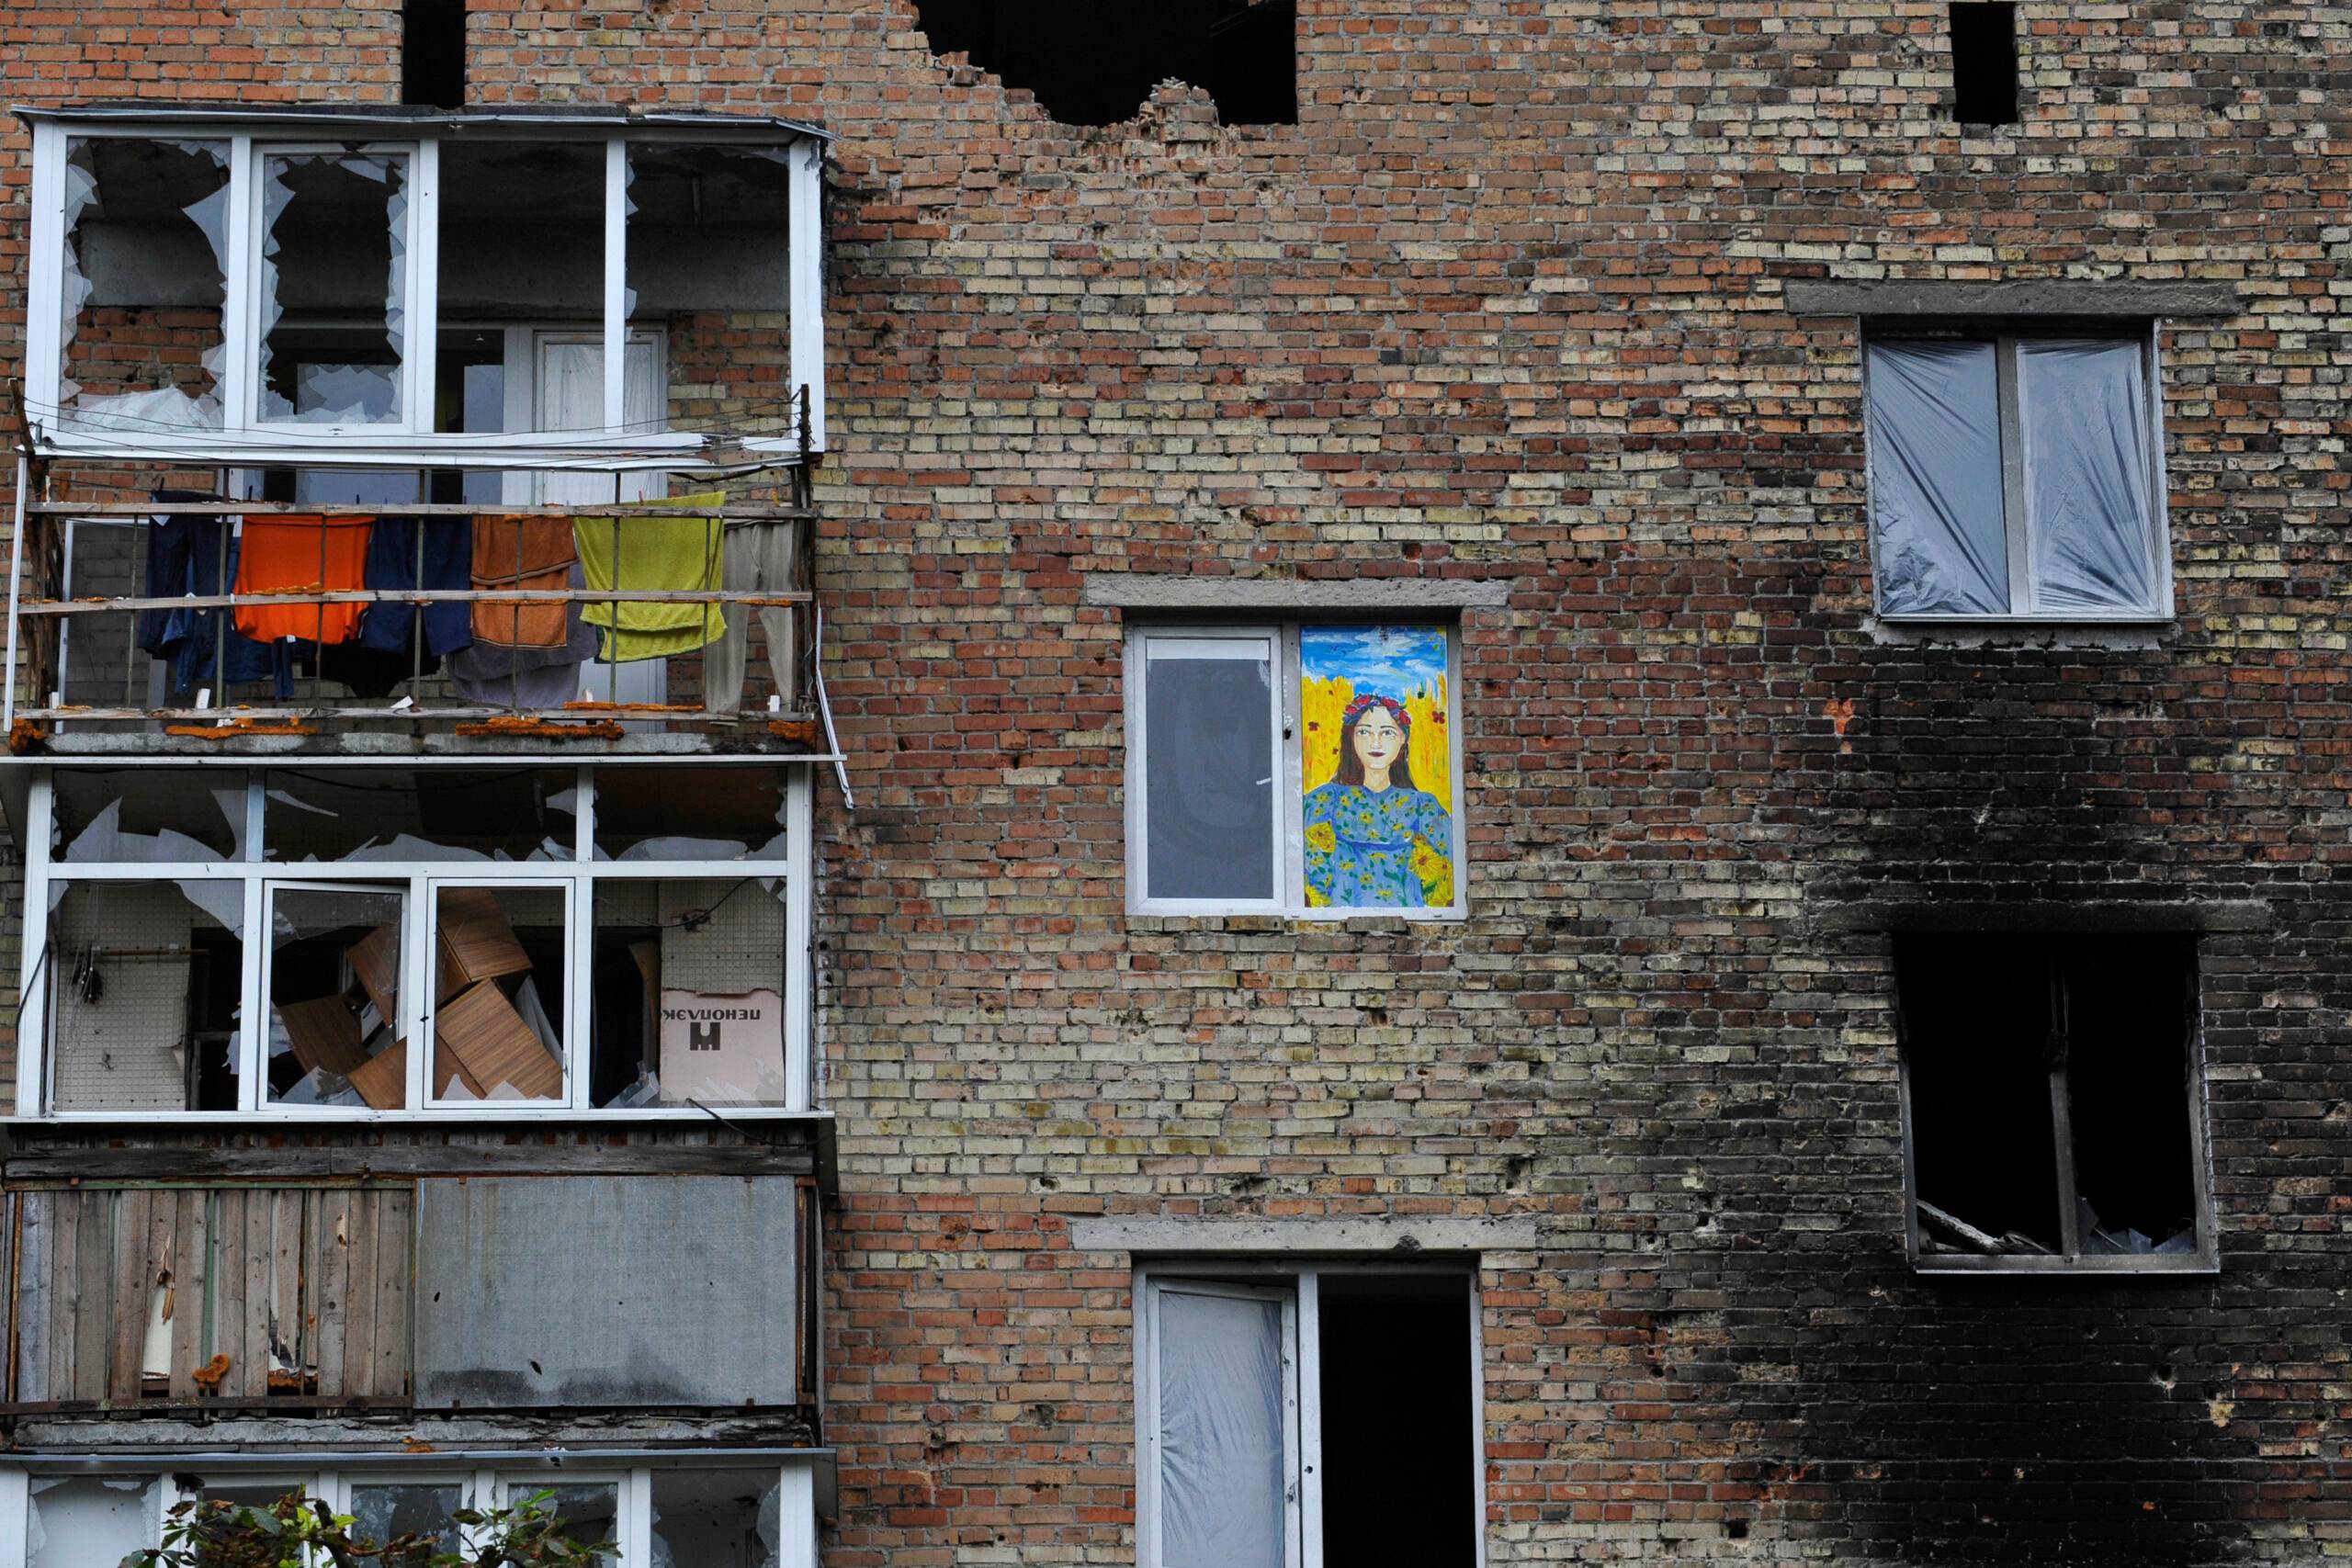 A painting in colours of the Ukrainian flag covers a broken window in a heavily damaged residential building in the town of Irpin on September 11, 2022, amid the Russian invasion of Ukraine. - Ukraine said on Sptember 11, 2022, that its forces were pushing back Russia's military from strategic holdouts in the east of the country after Moscow announced a retreat from Kyiv's sweeping counter-offensive. (Photo by SERGEI CHUZAVKOV / AFP)